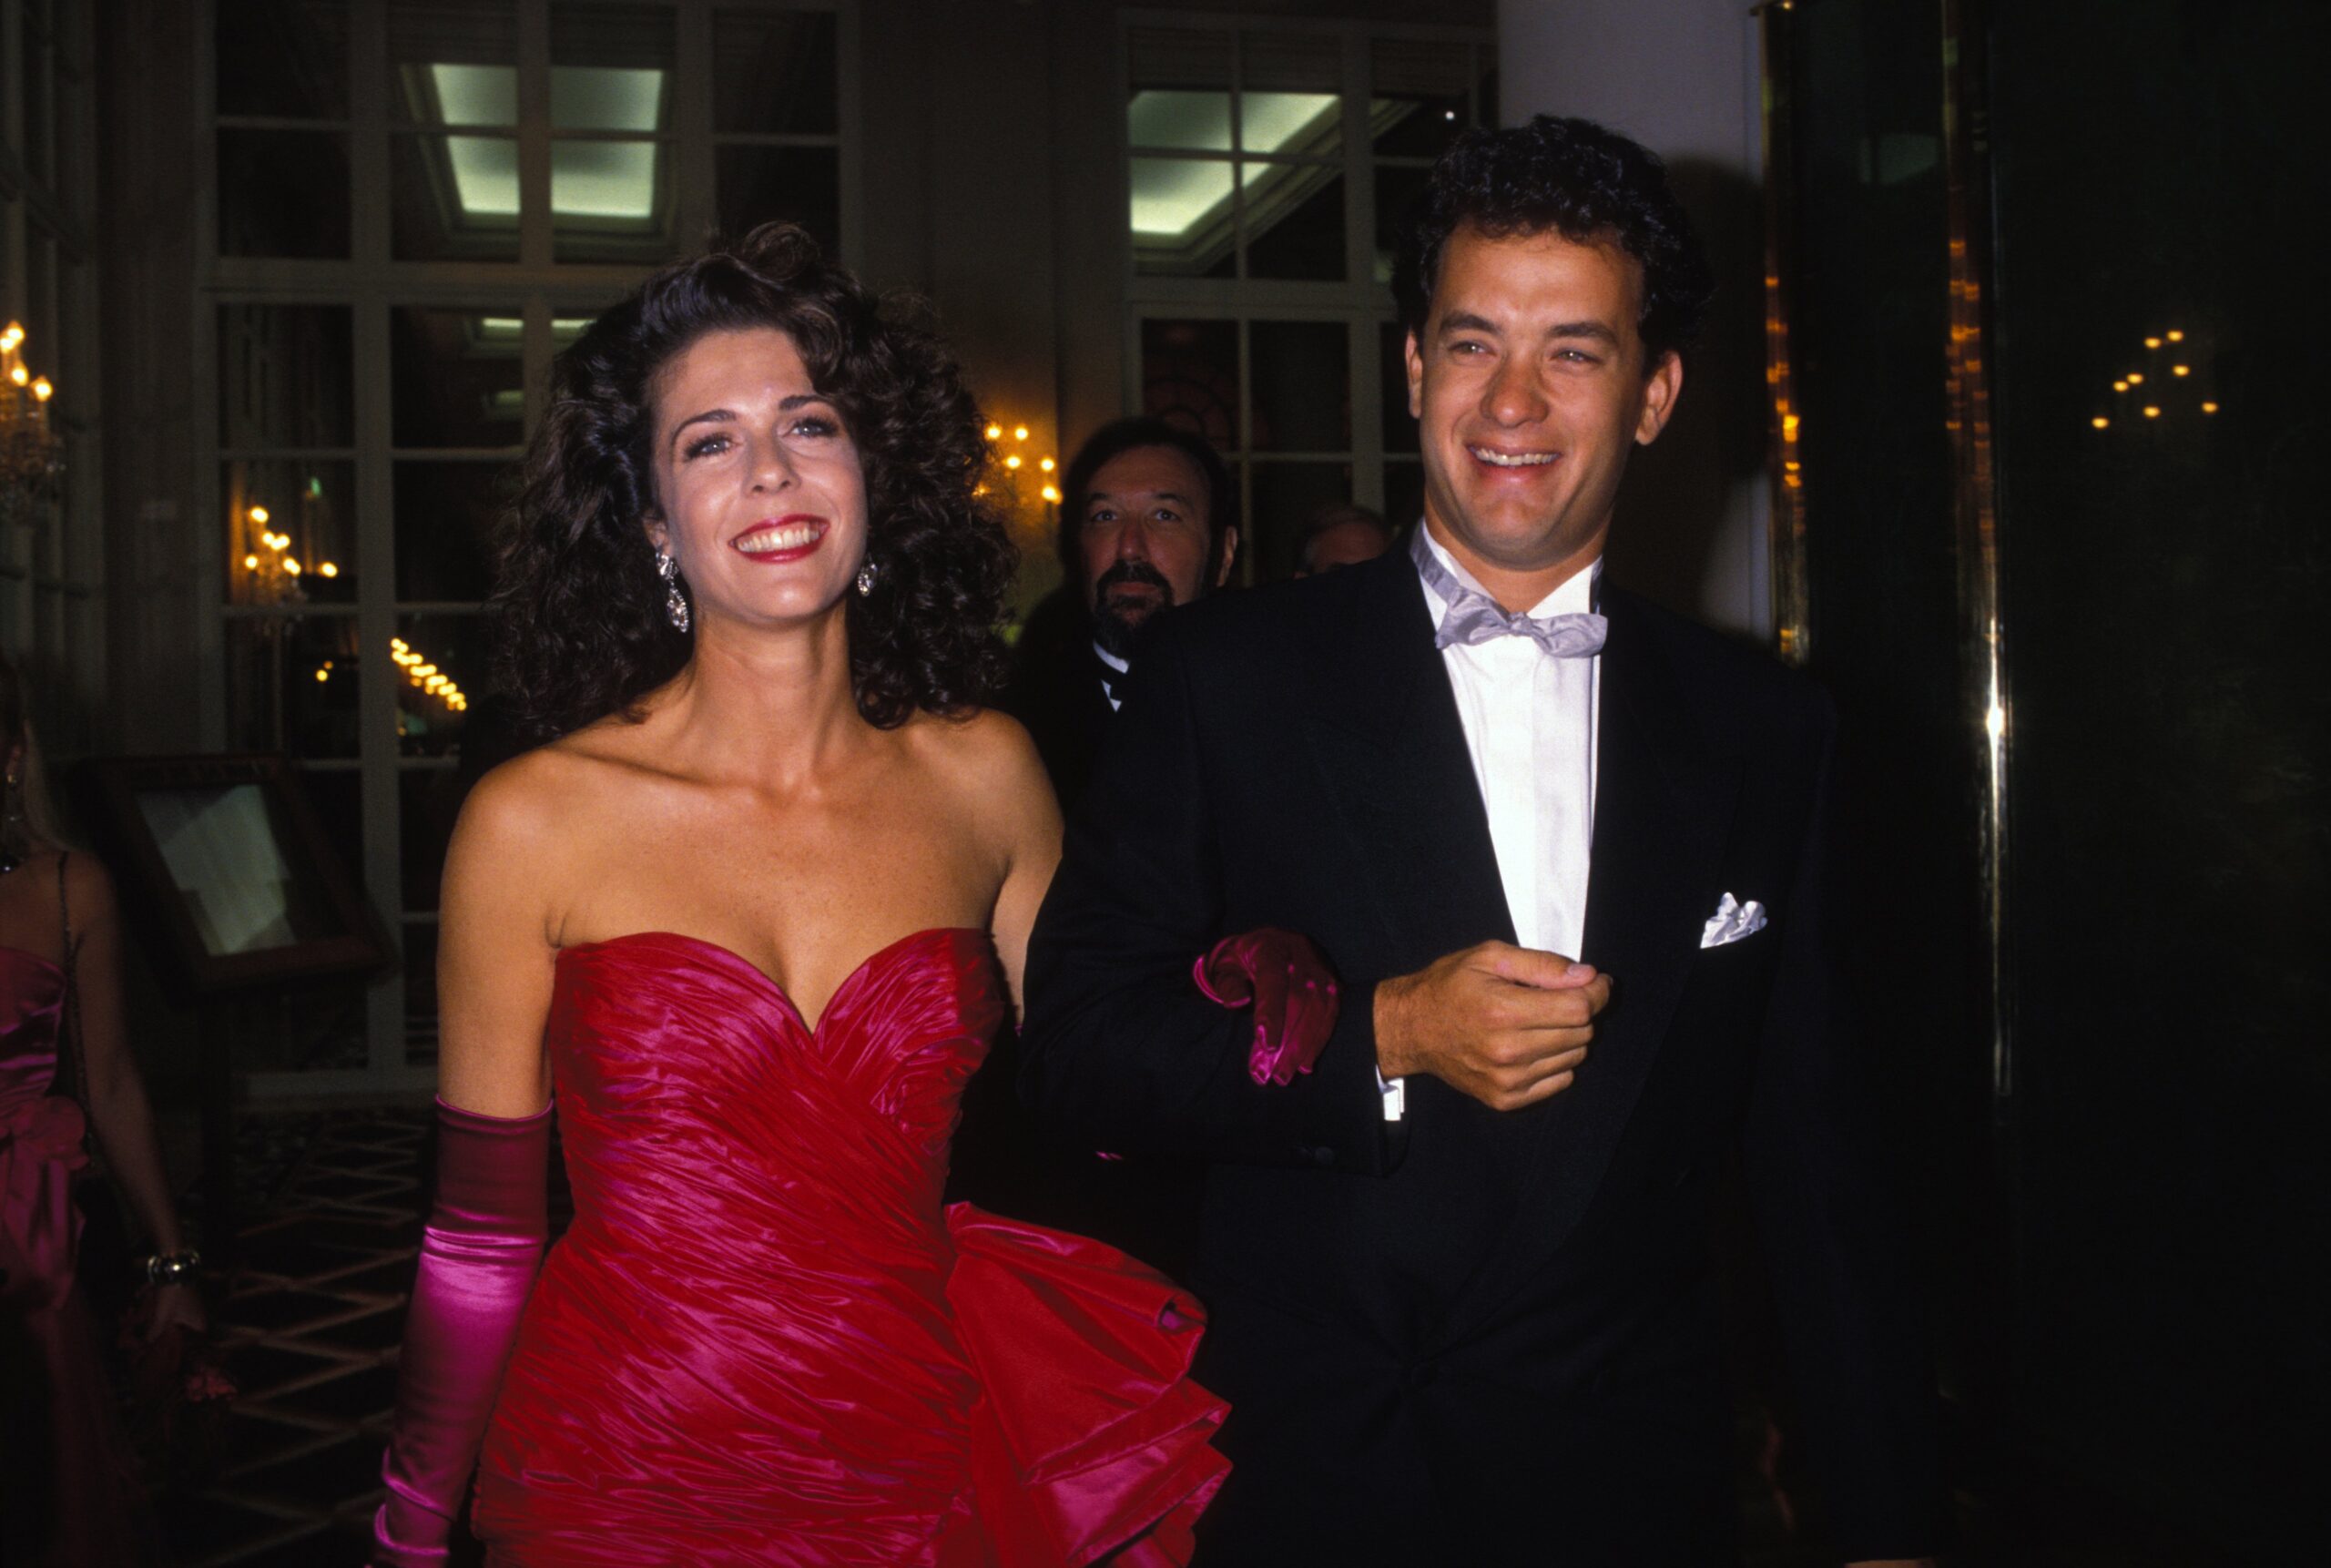 Actor Tom Hanks and his wife actress and singer Rita Wilson at the Deauville Festival in September 1988, France. / Source: Getty Images